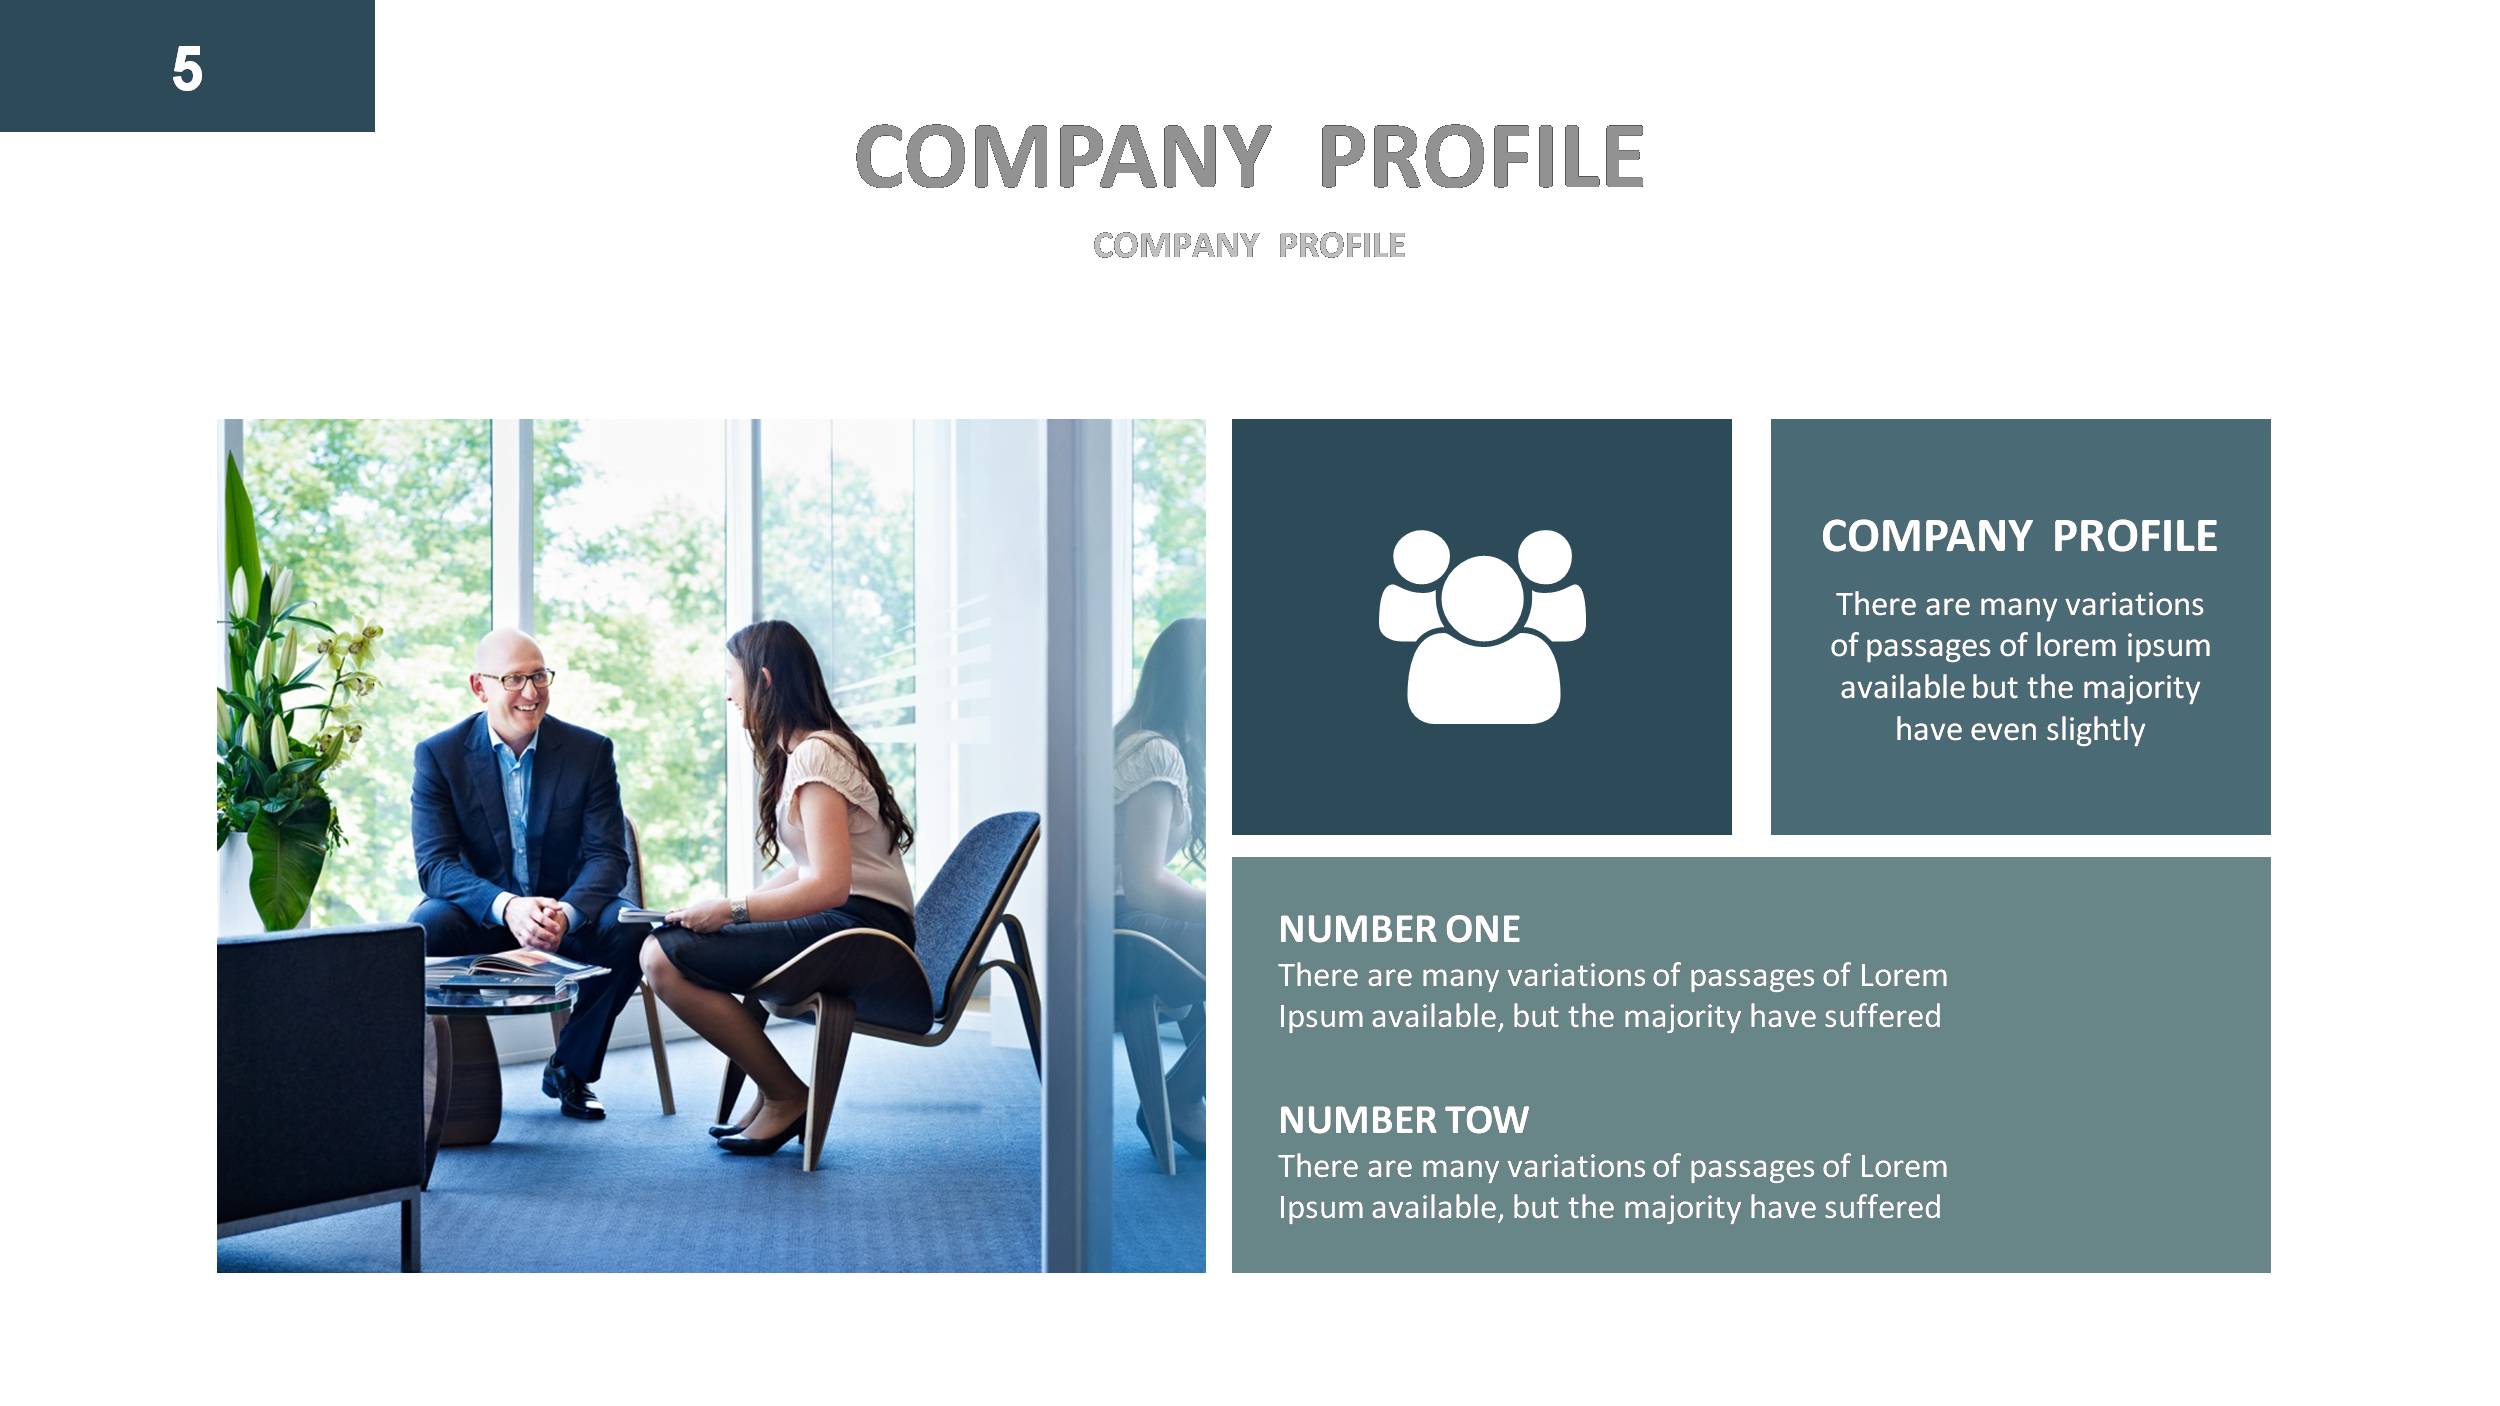 Company profile Google Slides Presentation Template by OceanInfographics